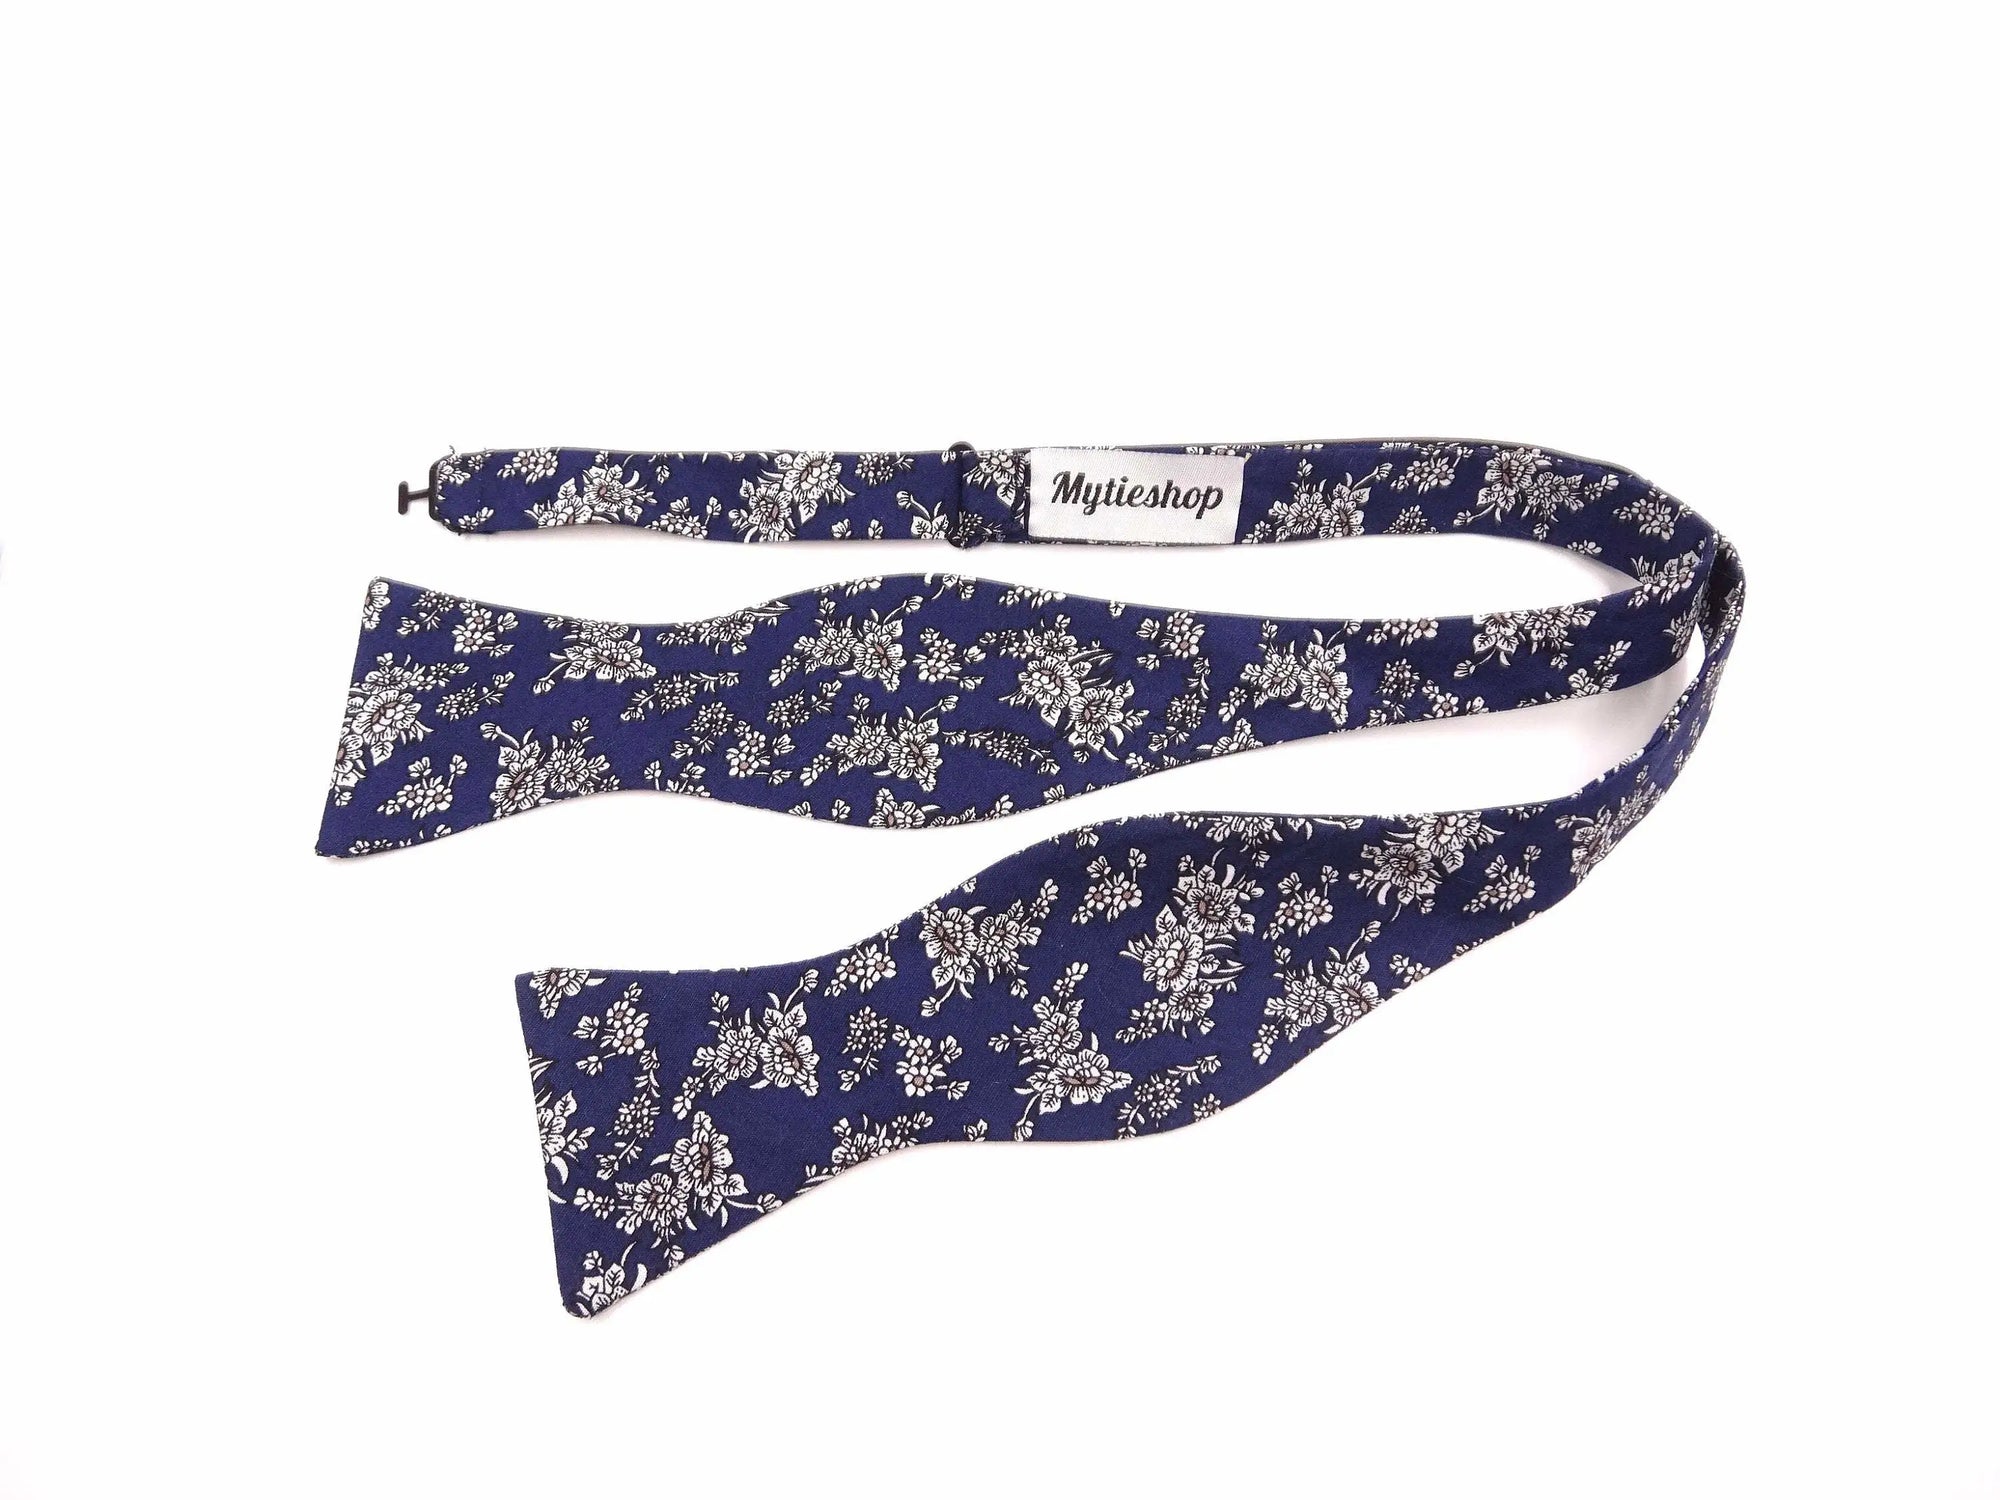 Blue Floral Bow Tie Self Tie OZIAS - MYTIESHOP-Blue Floral Bow Tie Self Tie Ozias Bow Tie 100% Cotton Flannel Handmade Adjustable to fit most neck sizes 13 3/4&quot; - 18&quot; Color: Blue Great for Prom Dinners Interviews Photo shoots Photo sessions Dates Groom to stand out between his Groomsmen pair them up with neckties while he wears the bow tie. Floral self tie bow tie for weddings and events. Great anniversary present and gift. Also great gift for the groom and his groomsmen to wear at the wedding, 